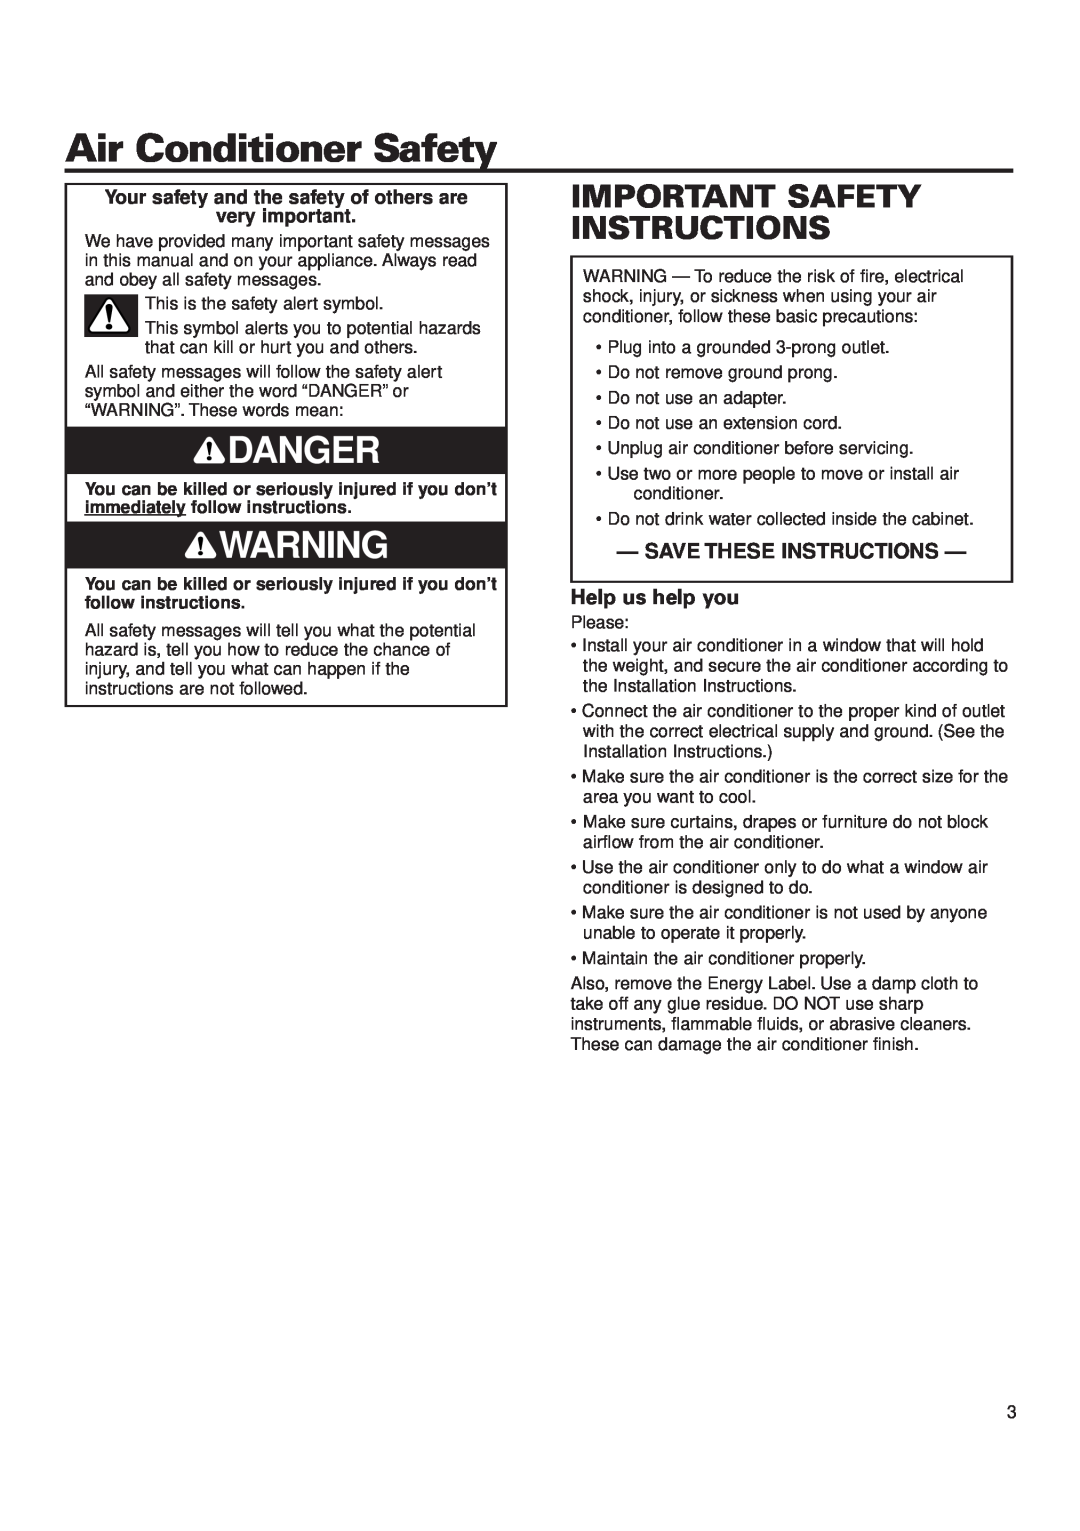 Whirlpool ACQ052PK0 Air Conditioner Safety, Danger, Important Safety Instructions, Save These Instructions 